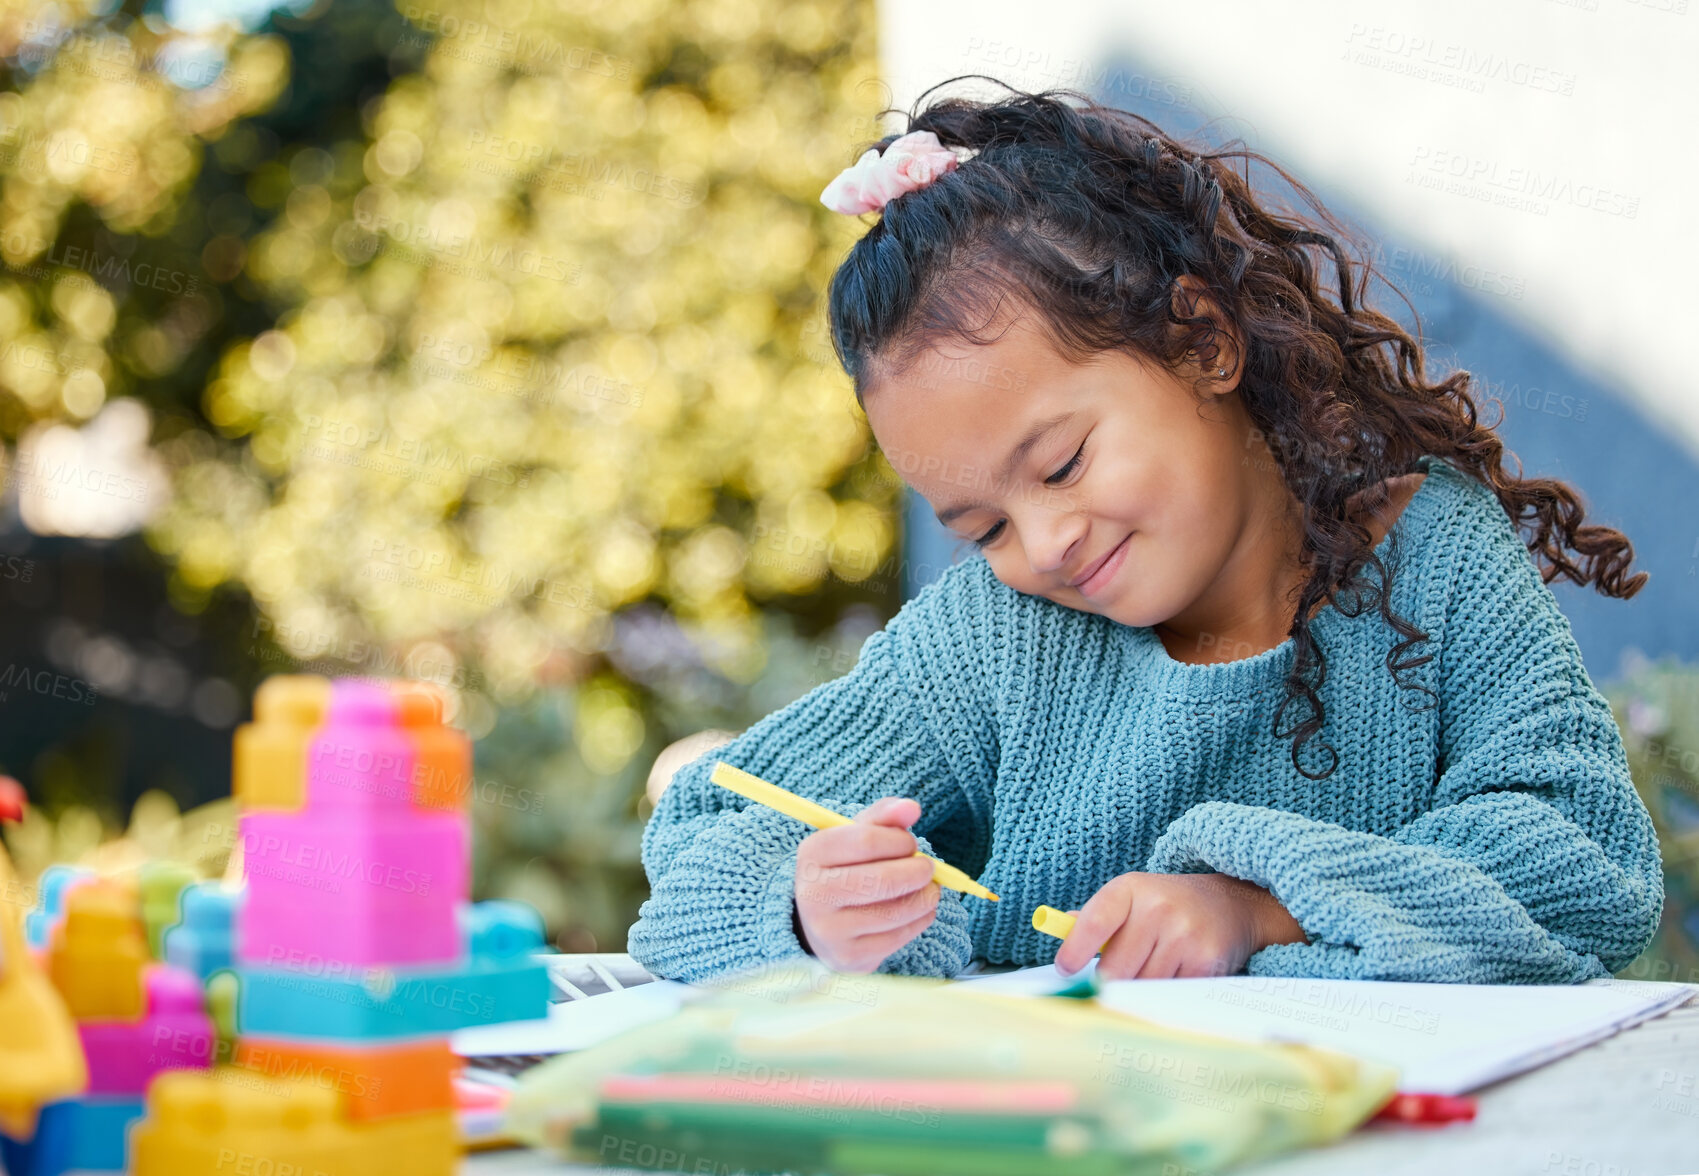 Buy stock photo Shot of a little girl completing homework in her yard